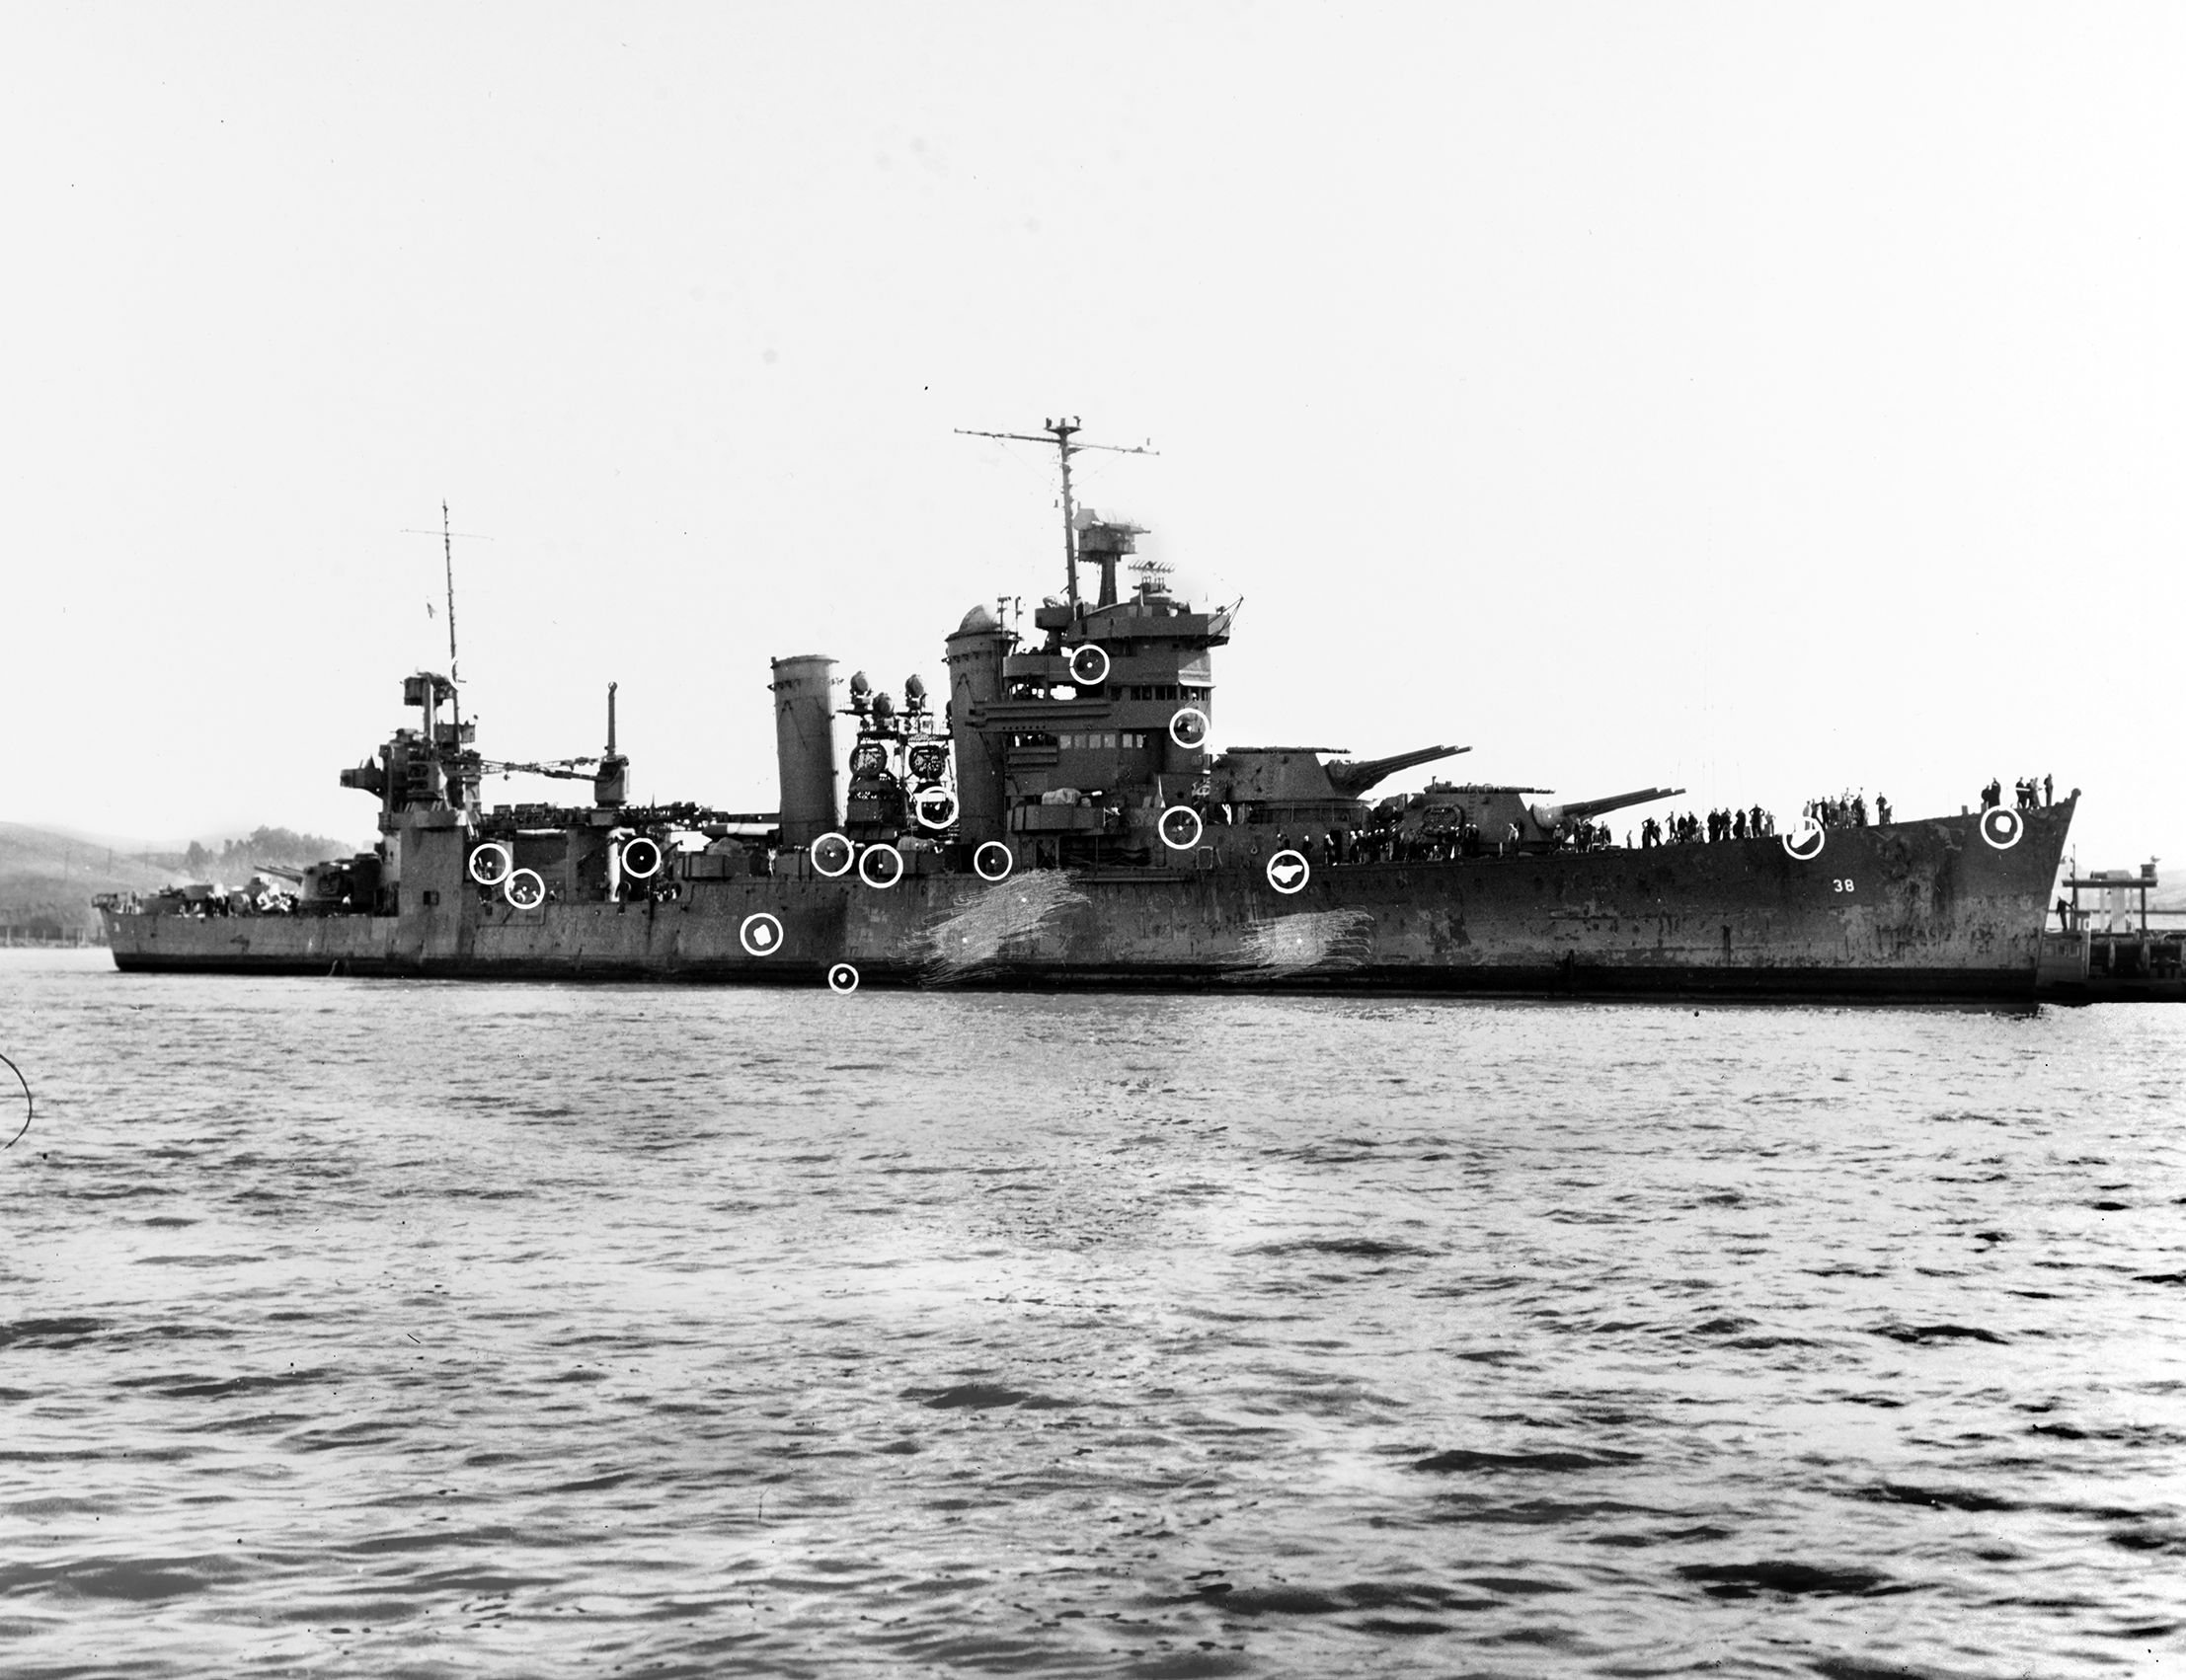 After returning to Mare Island Naval Yard for repairs following the Naval Battle of Guadalcanal, the heavy cruiser USS San Francisco is shown with circles marking areas where the ship sustained battle damage. Capt. Cassin Young and Adm. Daniel Callaghan were killed during the nocturnal battle in the Solomons.